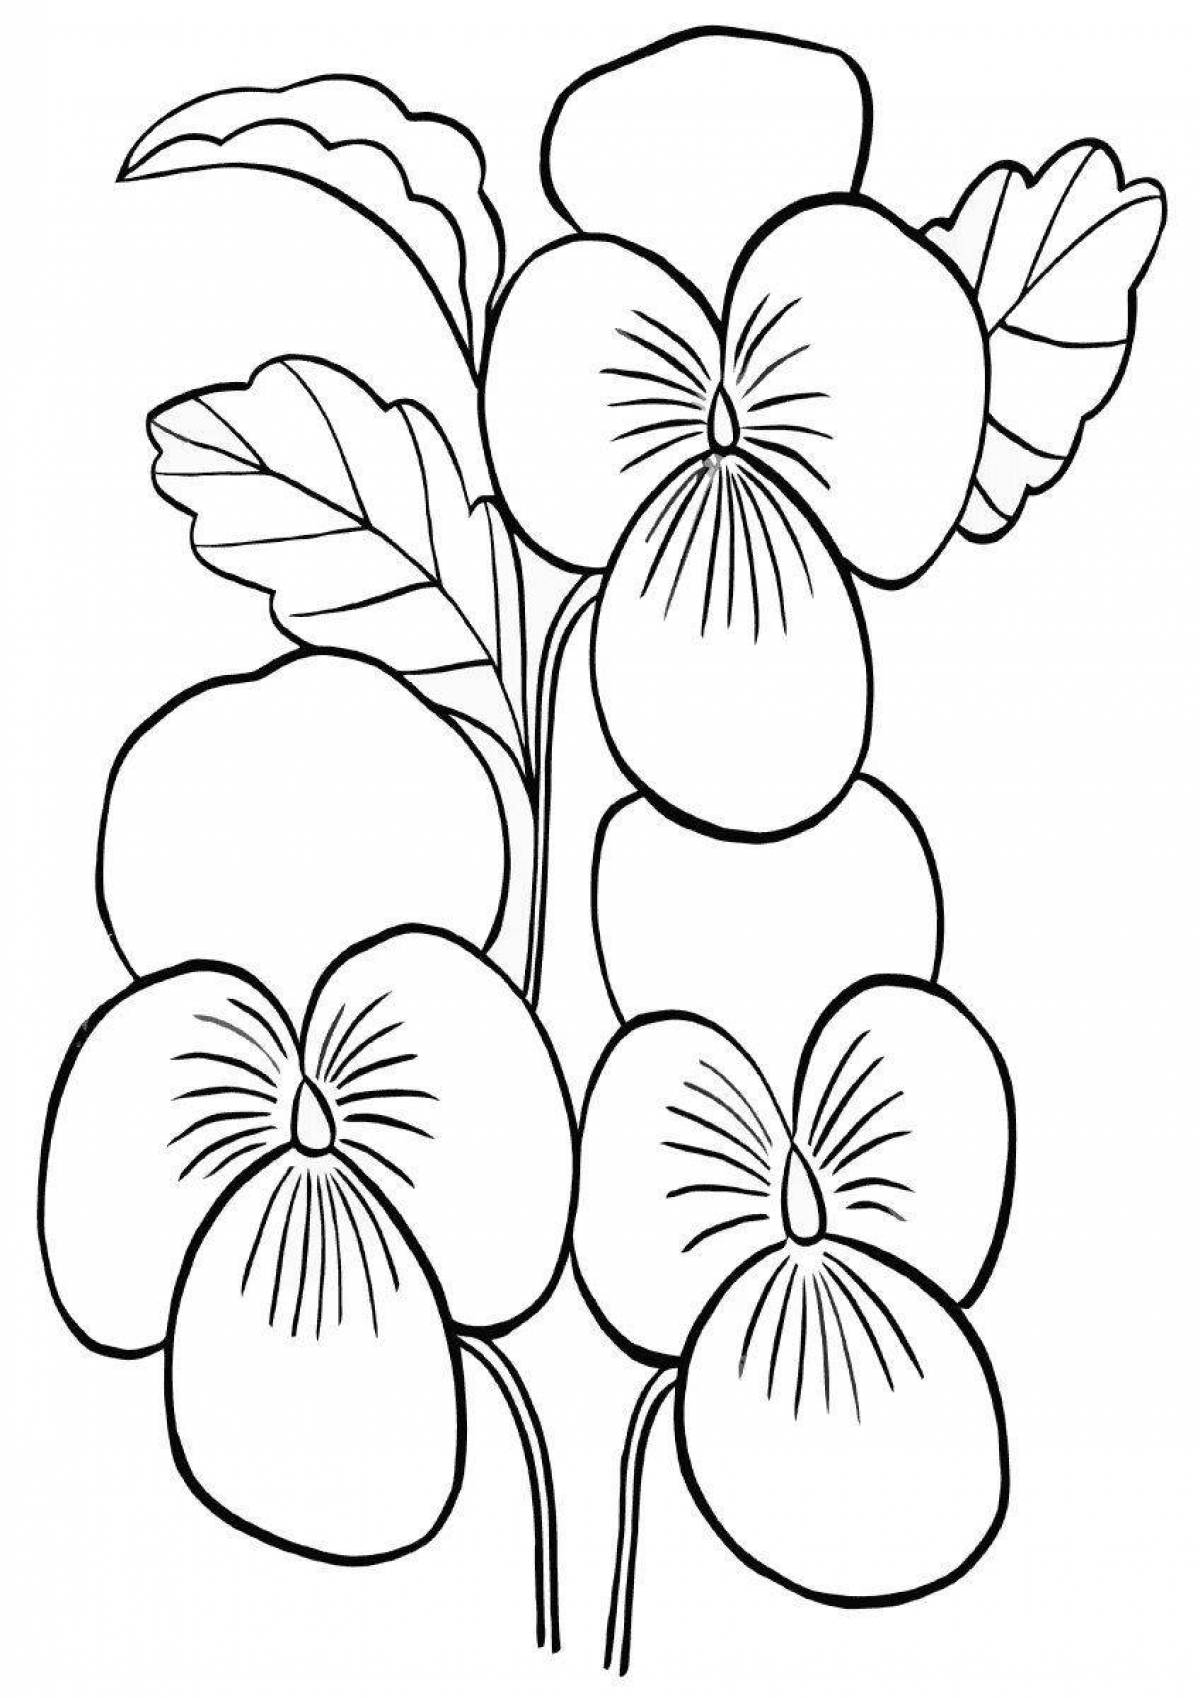 Calming purple flower coloring page